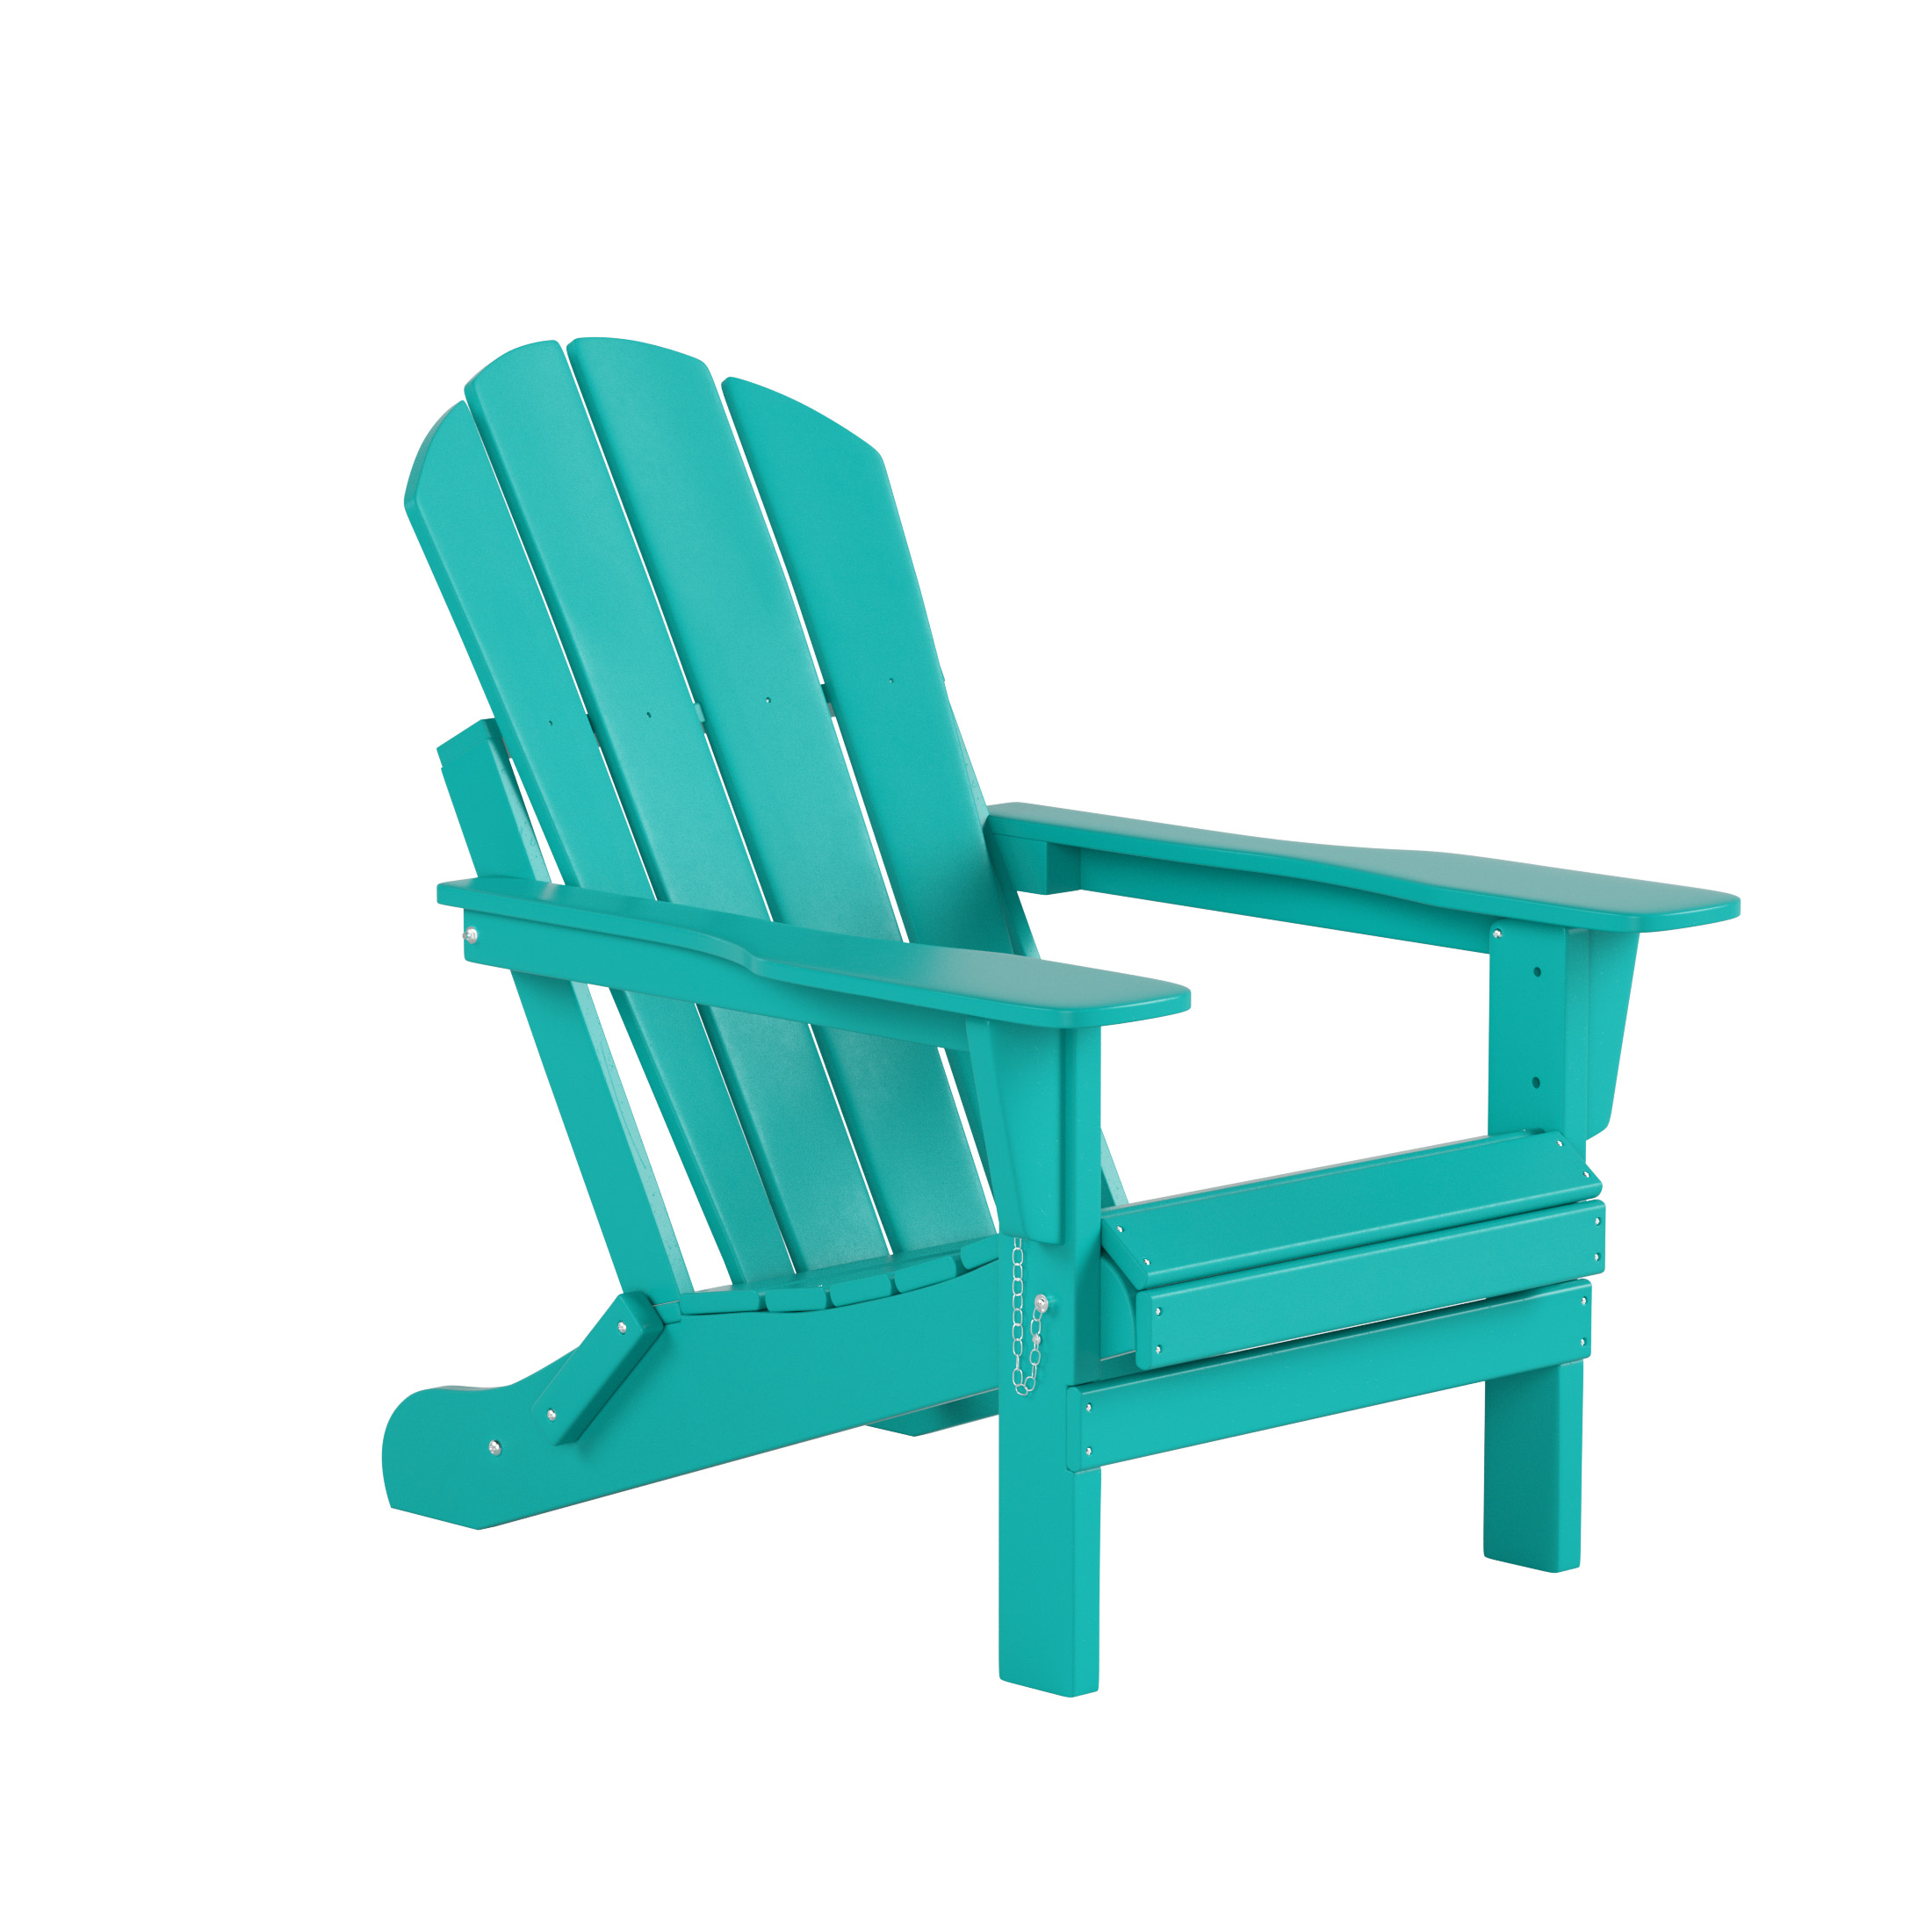 WestinTrends Malibu 7-Pieces Outdoor Patio Furniture Set, All Weather Outdoor Seating Plastic Adirondack Chair Set of 4, Coffee Table and 2 Side Table, Turquoise - image 3 of 7